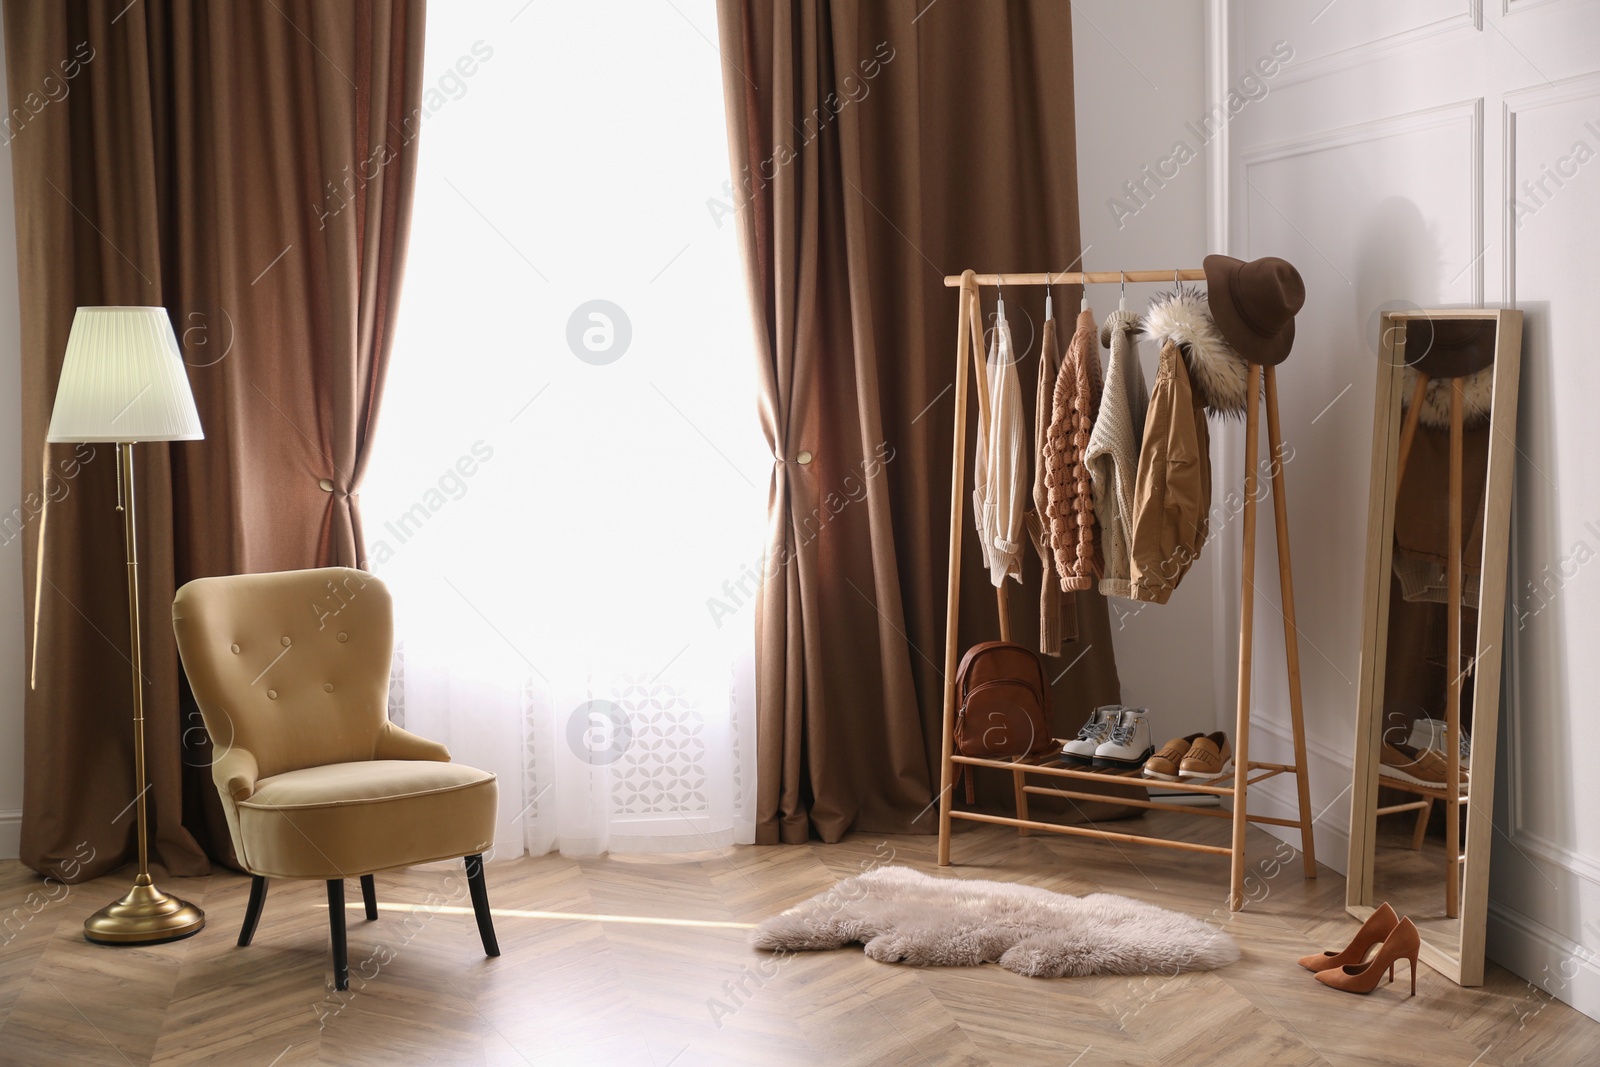 Photo of Comfortable armchair and rack near window with stylish curtains in room. Interior design